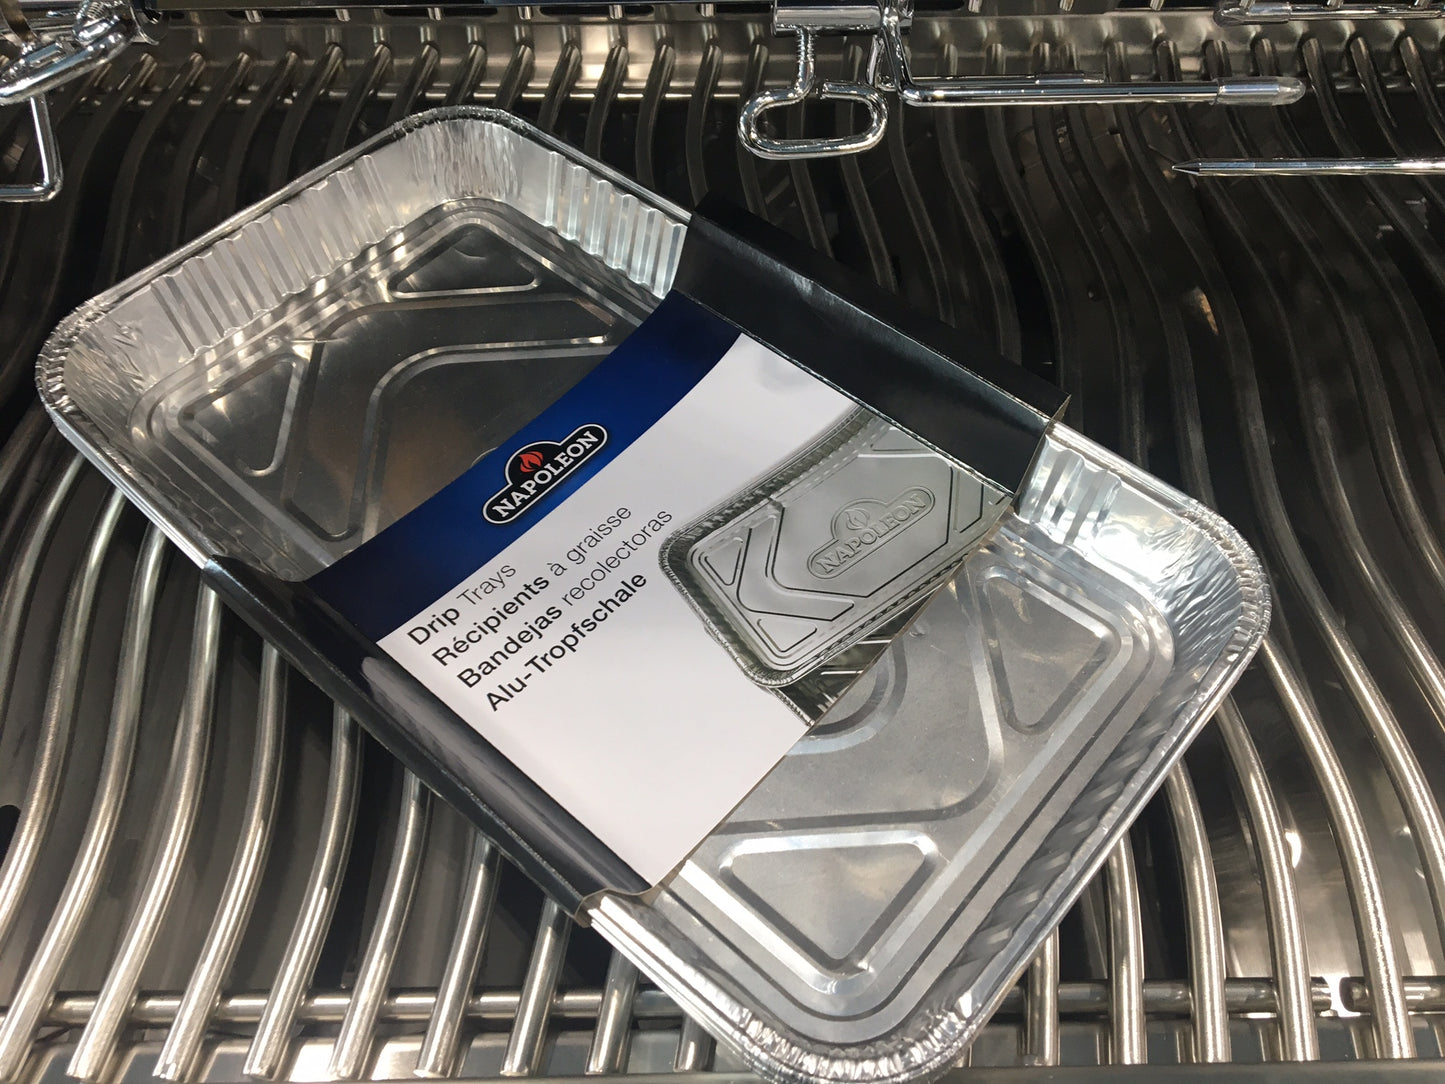 Napoleon 62008 Replacement Drip Pans | Available in-store and online with Barbecues Galore. Located in Burlington, Oakville, Etobicoke & Calgary. Shop for all of your BBQ, patio, accessory and parts needs.